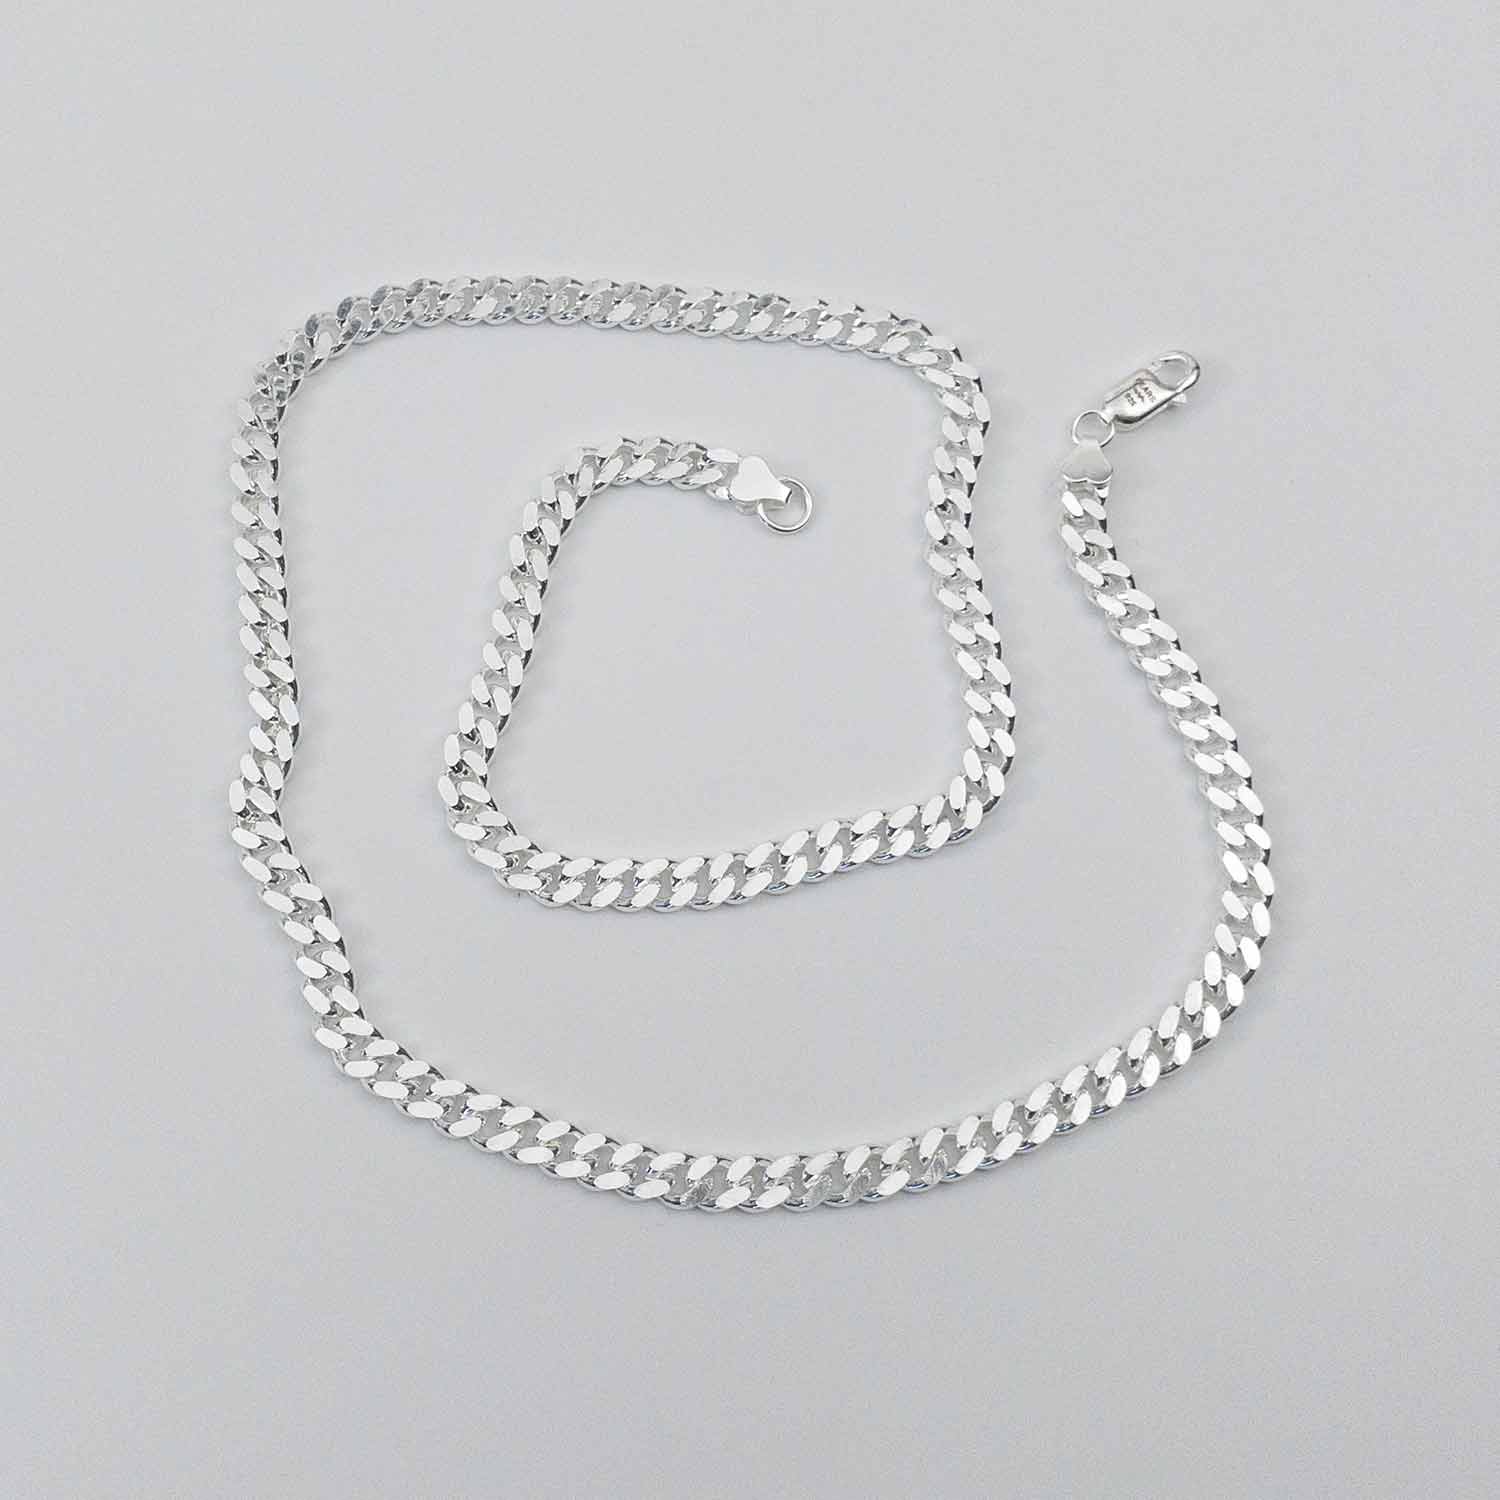 Sterling Silver 5mm Cuban Chain, unclasped in spiral, made by FEARS 925 by Personal Fears